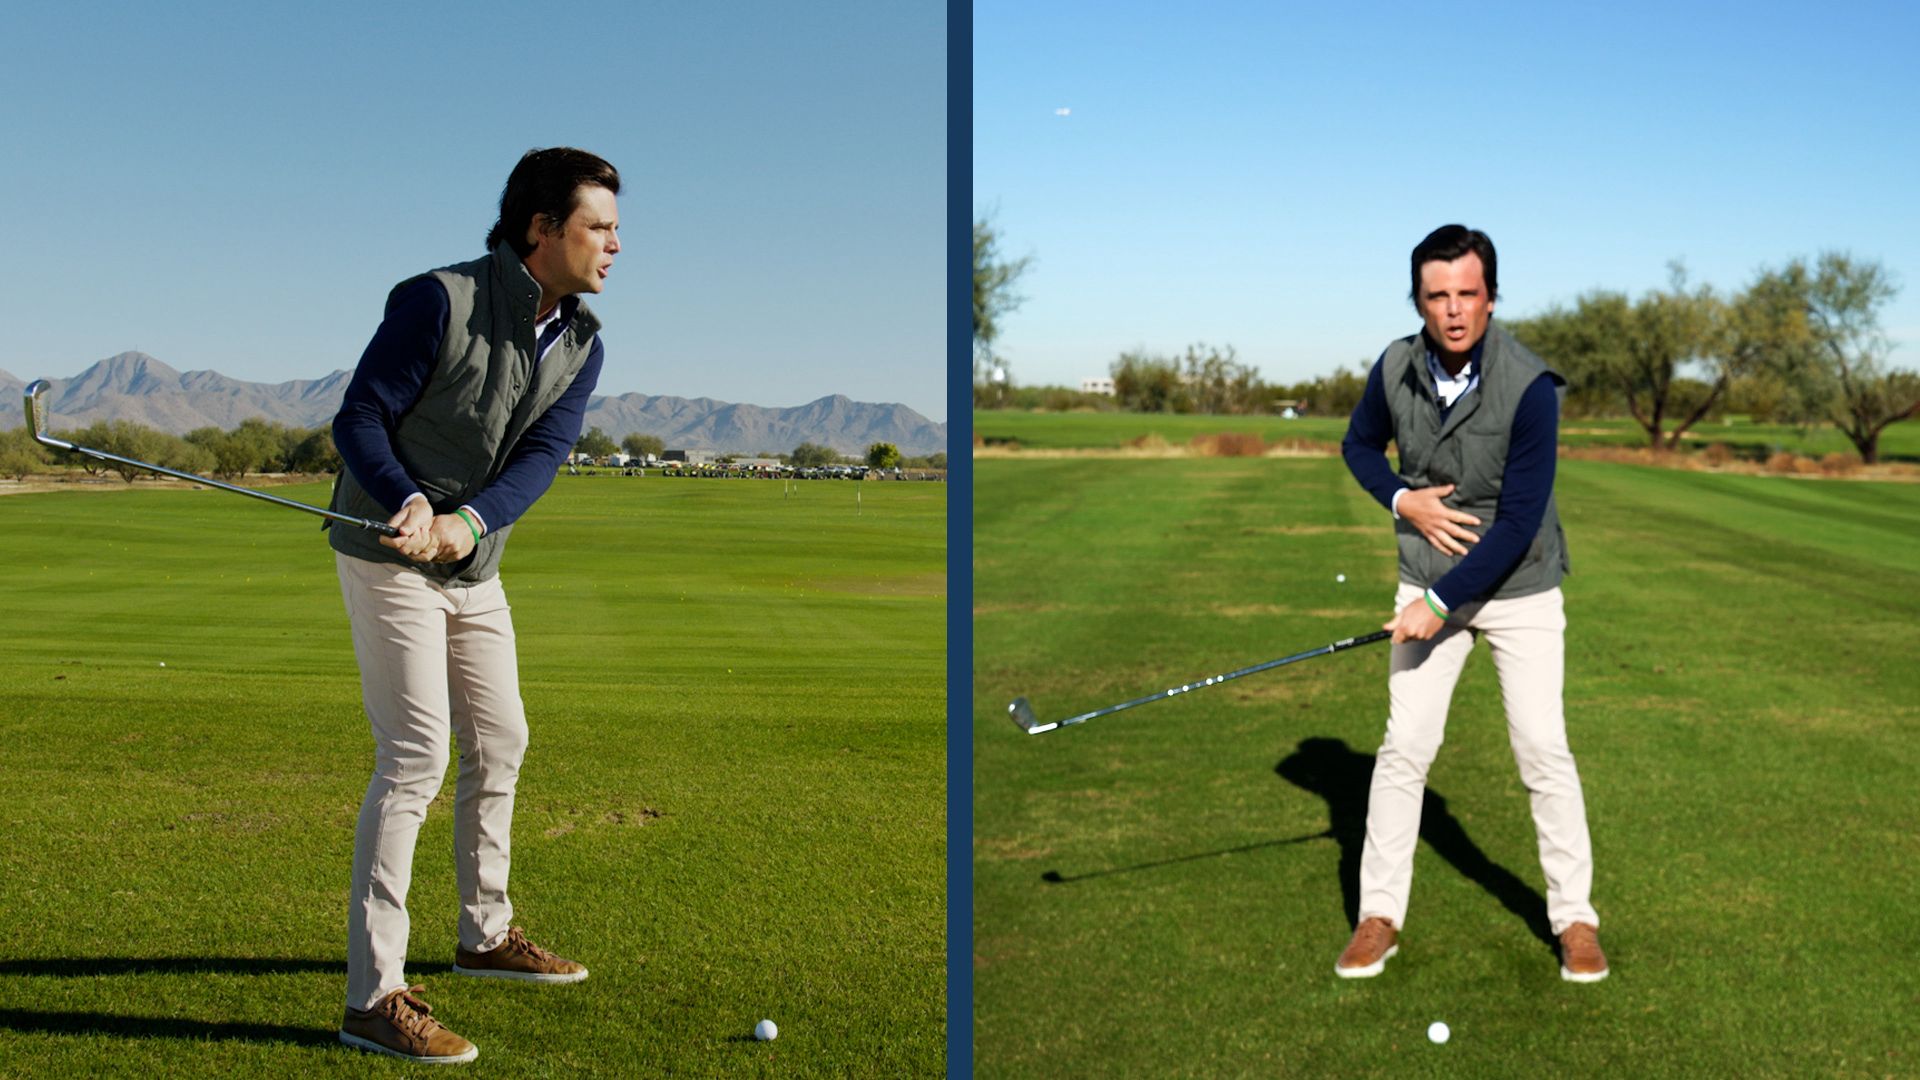 How to avoid hitting your golf ball off the heel